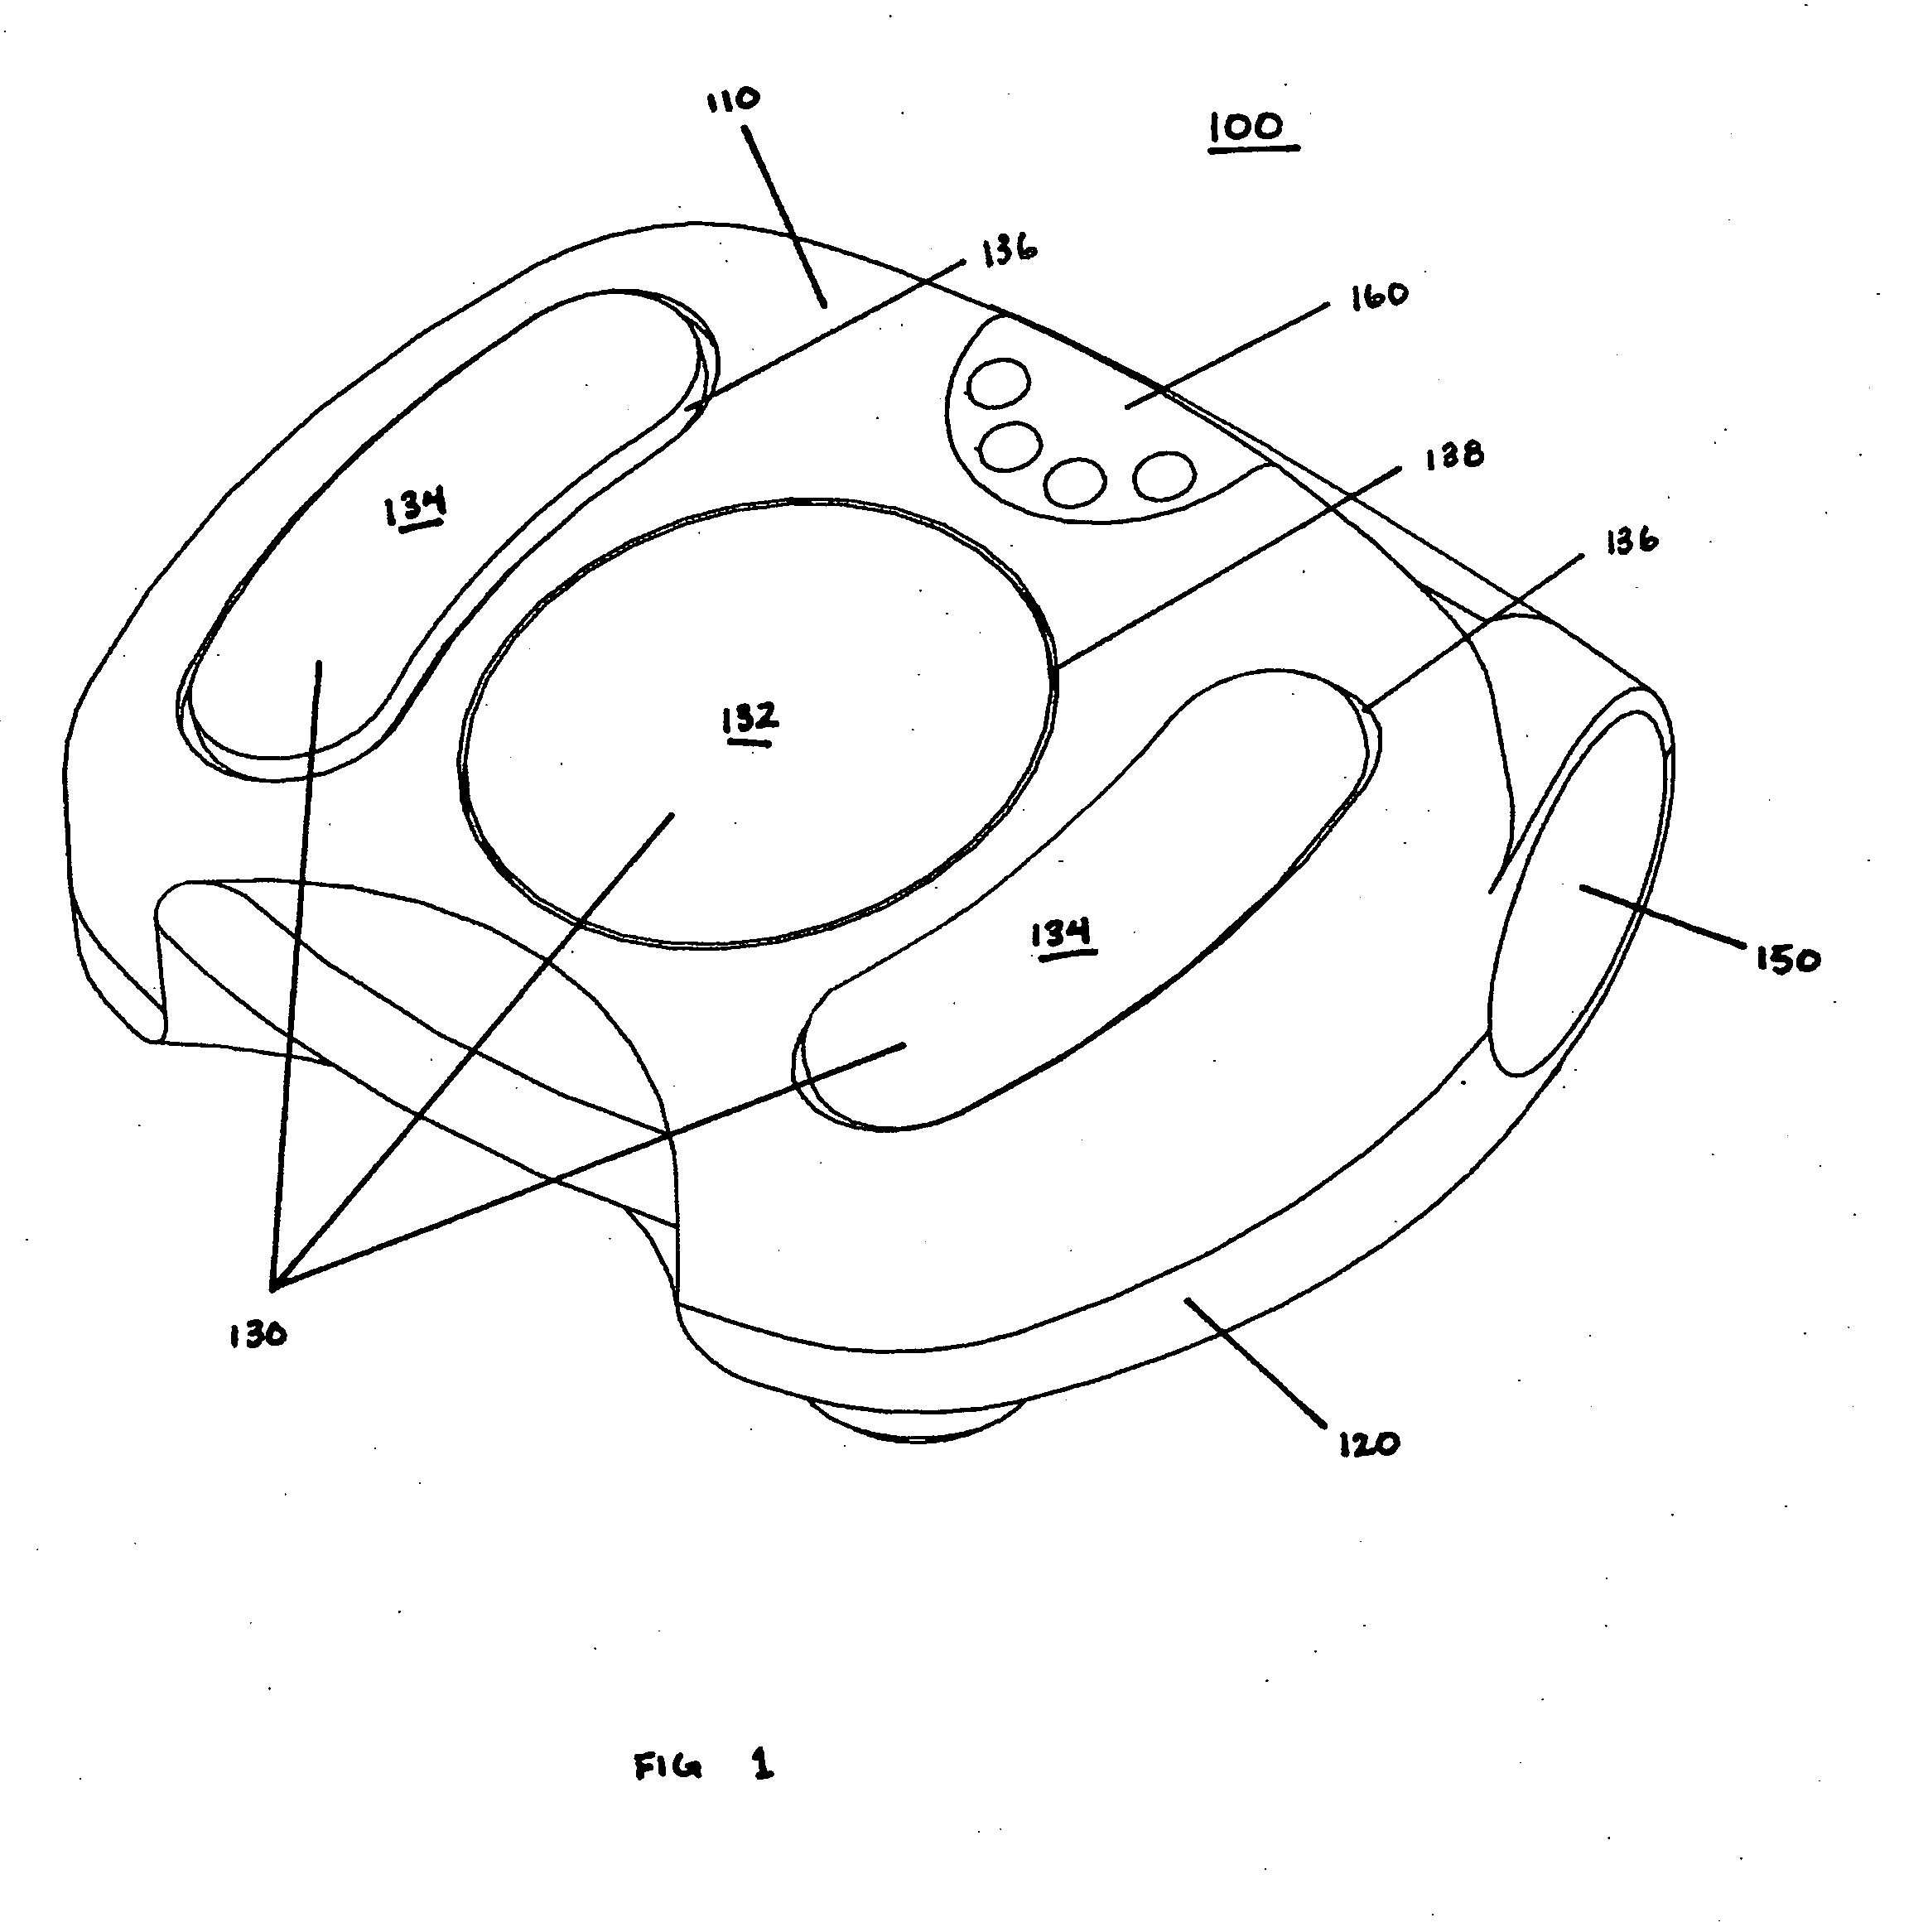 Body part treatment device with air diverter